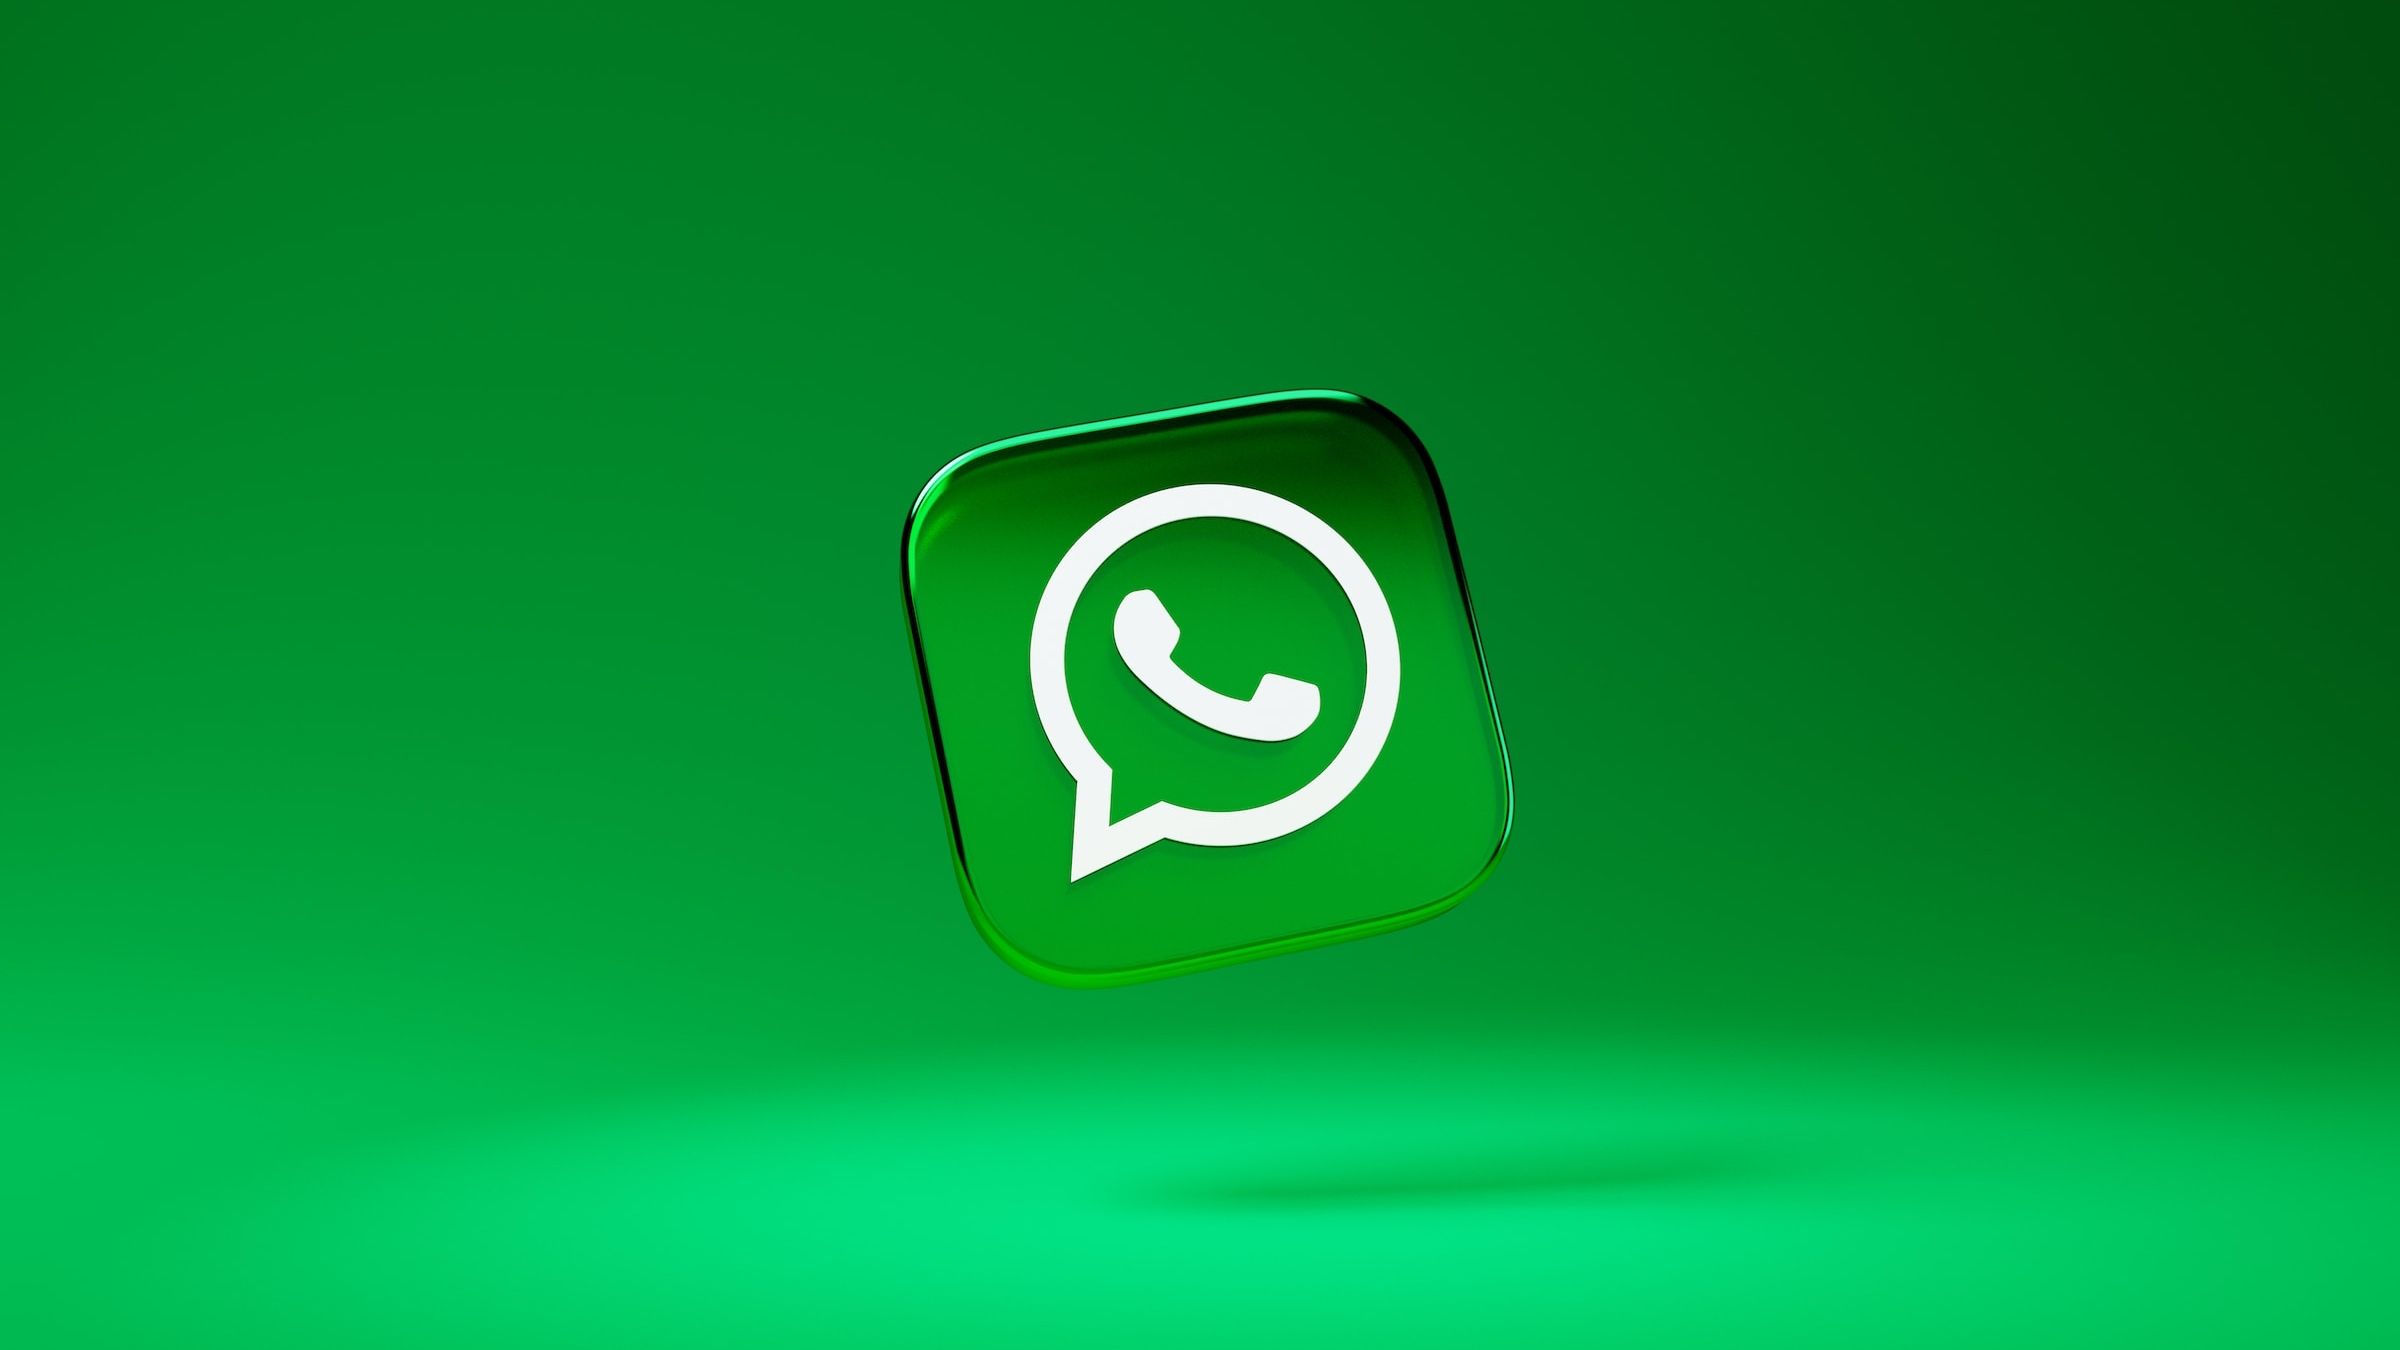 WhatsApp logo with green background